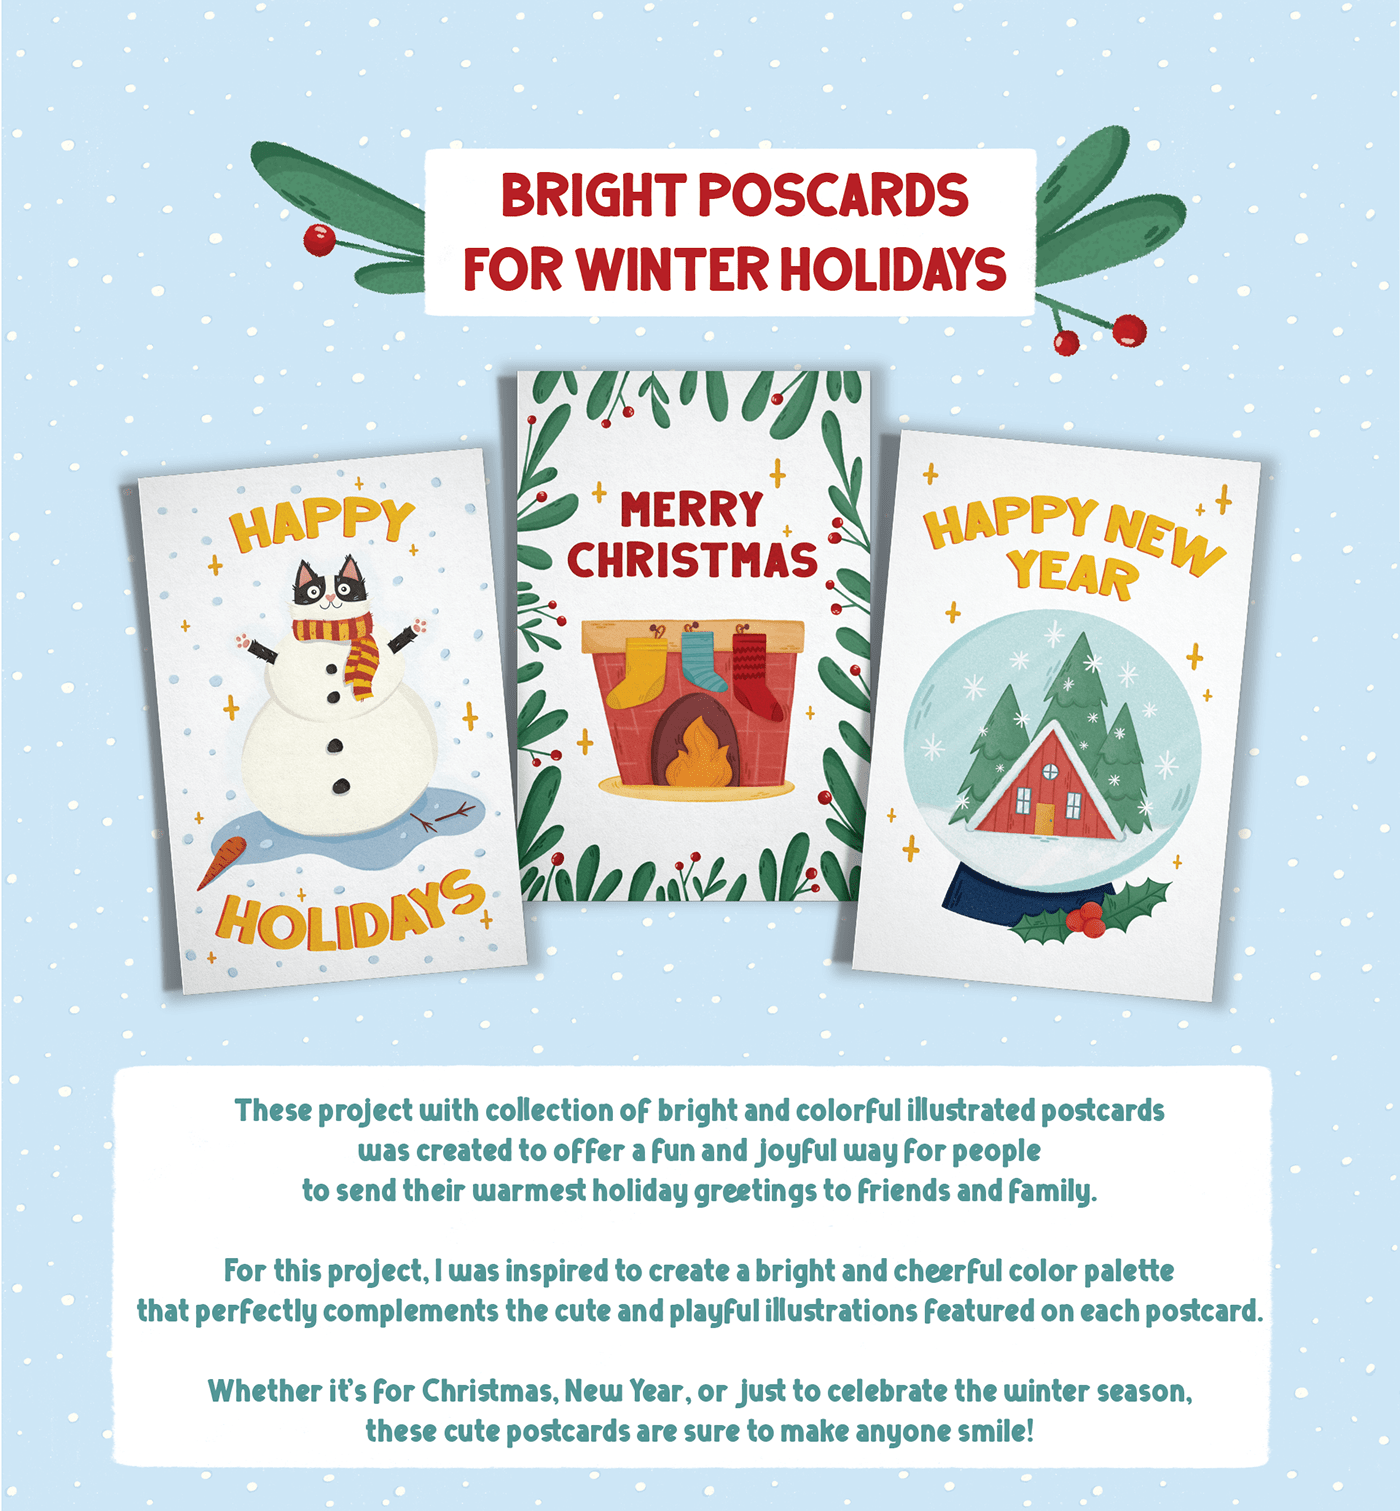 Collection of bright and colorful illustrated postcards for winter holidays, and Christmas.